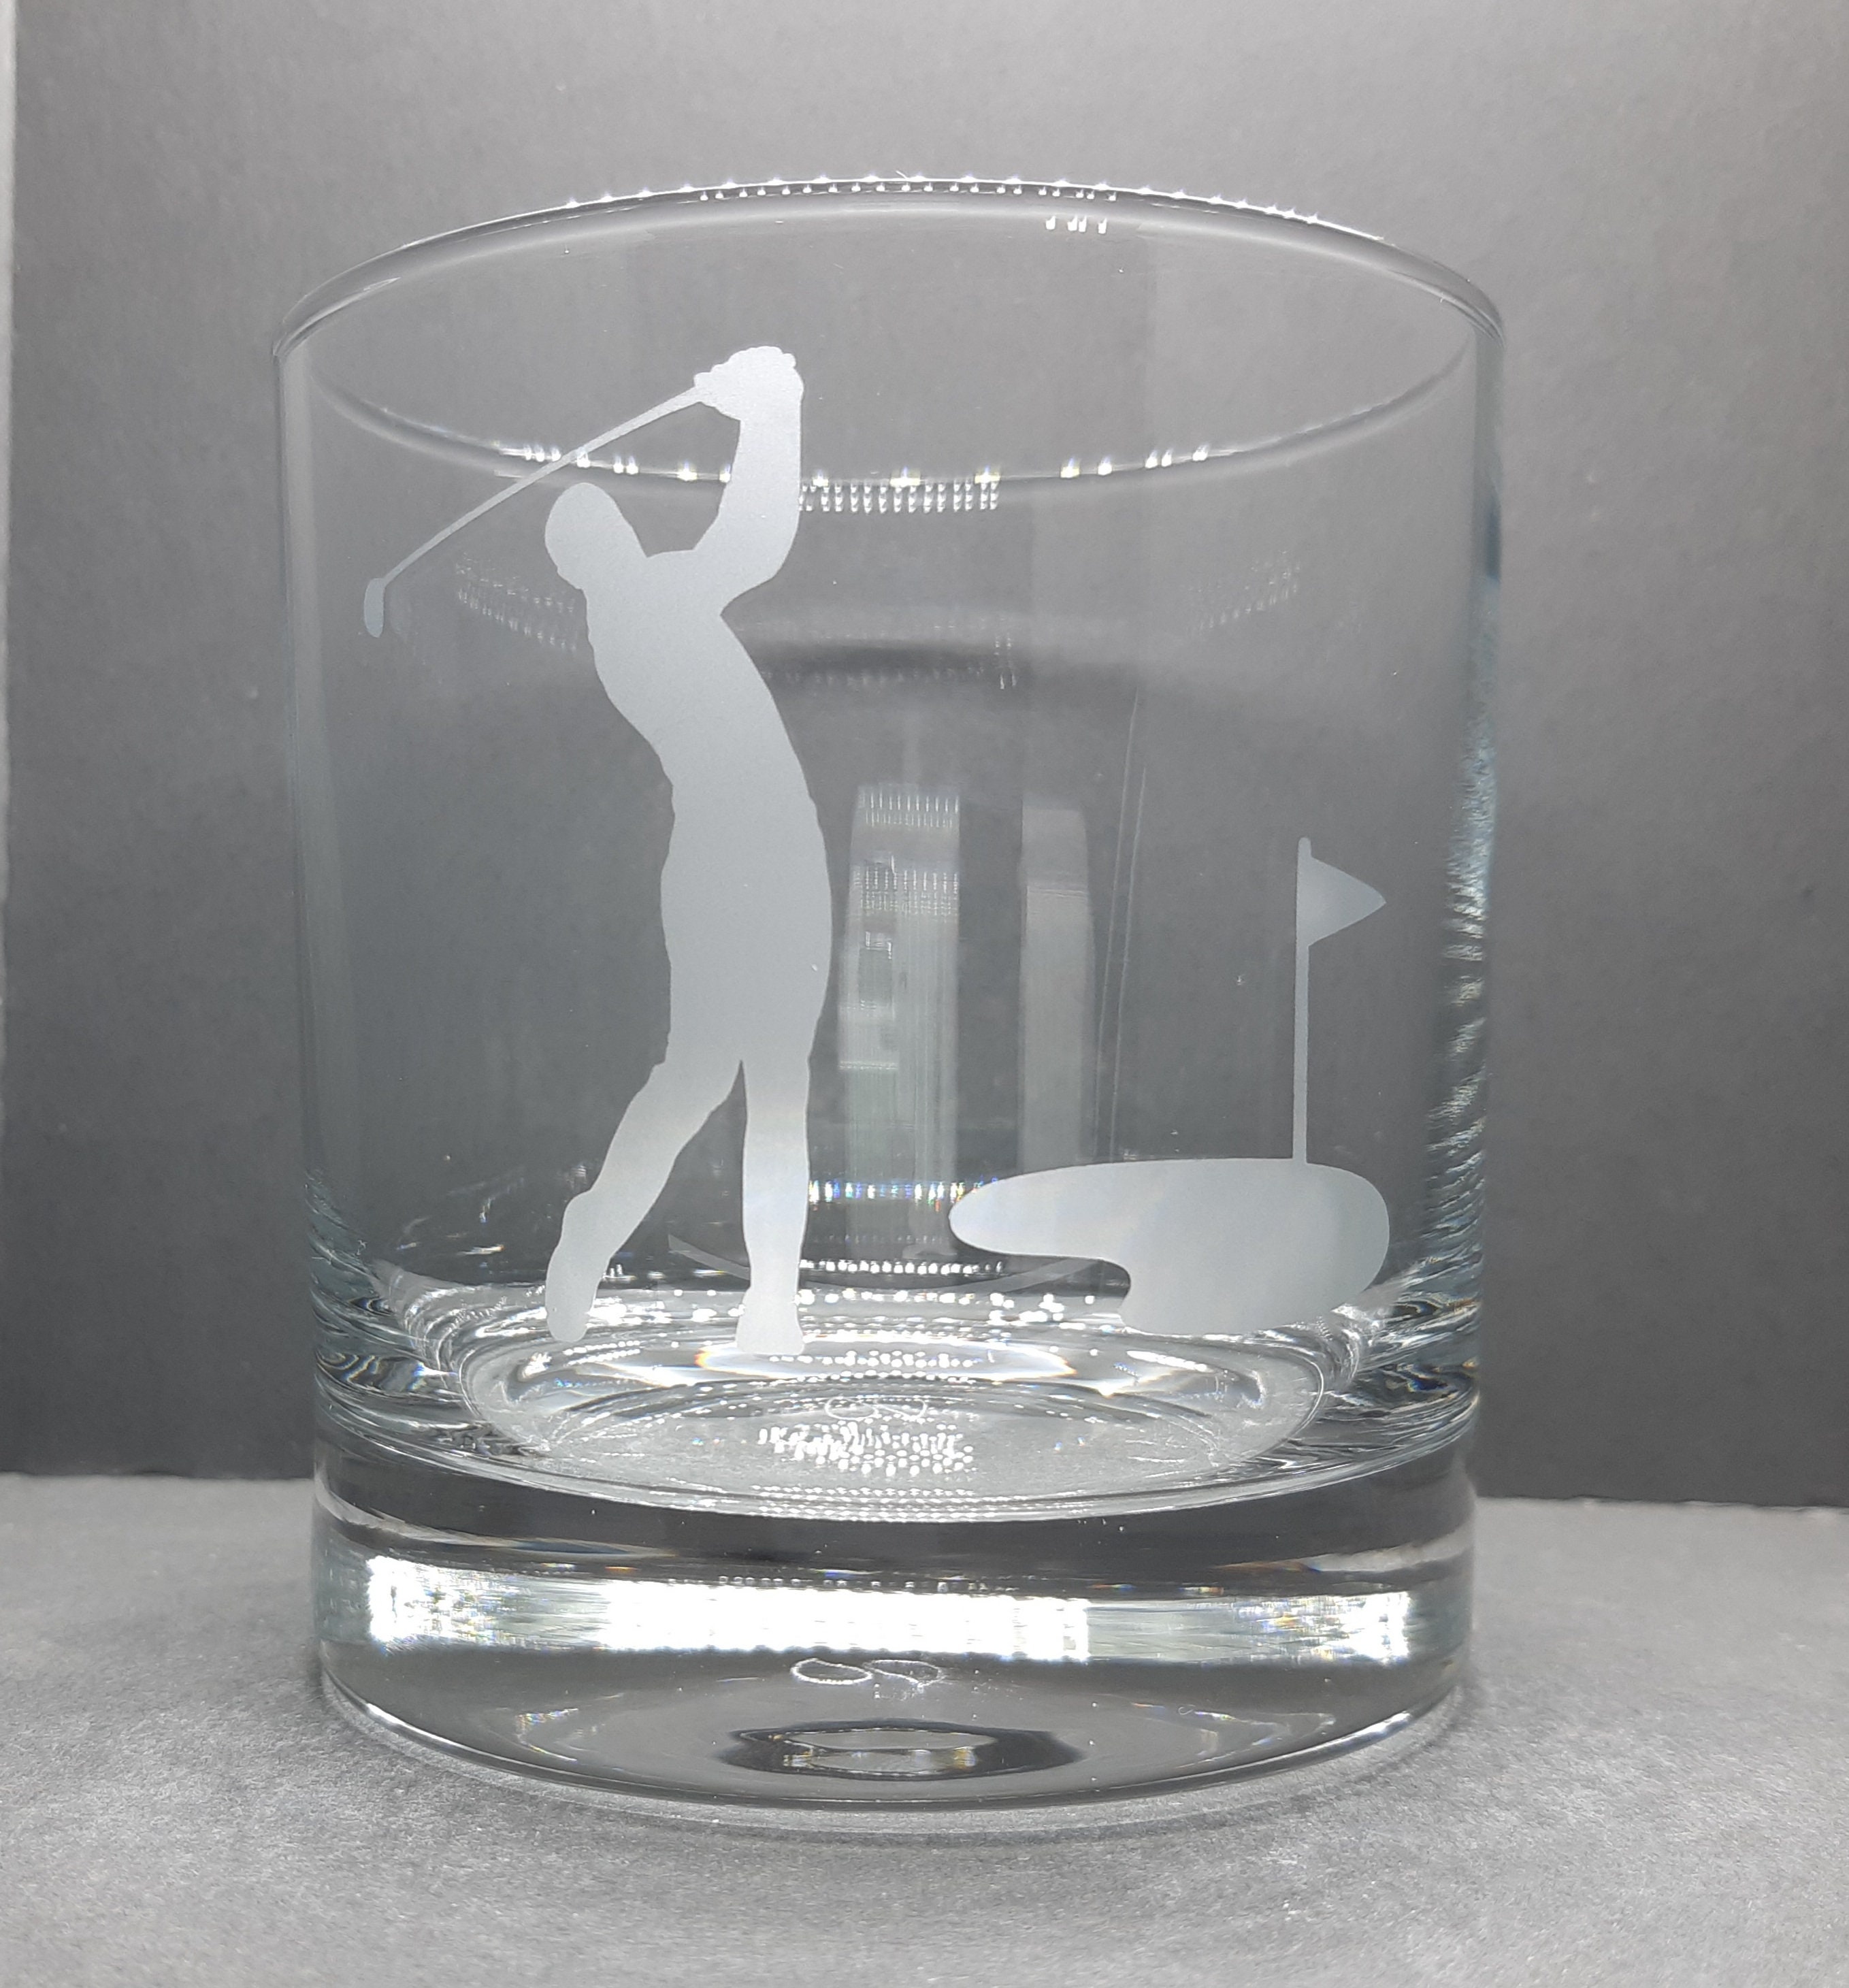 GreenCor Funny Golf Christmas Gifts for Men, Him, Husband, Friend - Whiskey  Glass Set Engraved 'To The “Below Par” Golfer”' Gifts for Birthday,  Christmas, Friend, Bachelors Party, Anniversary 